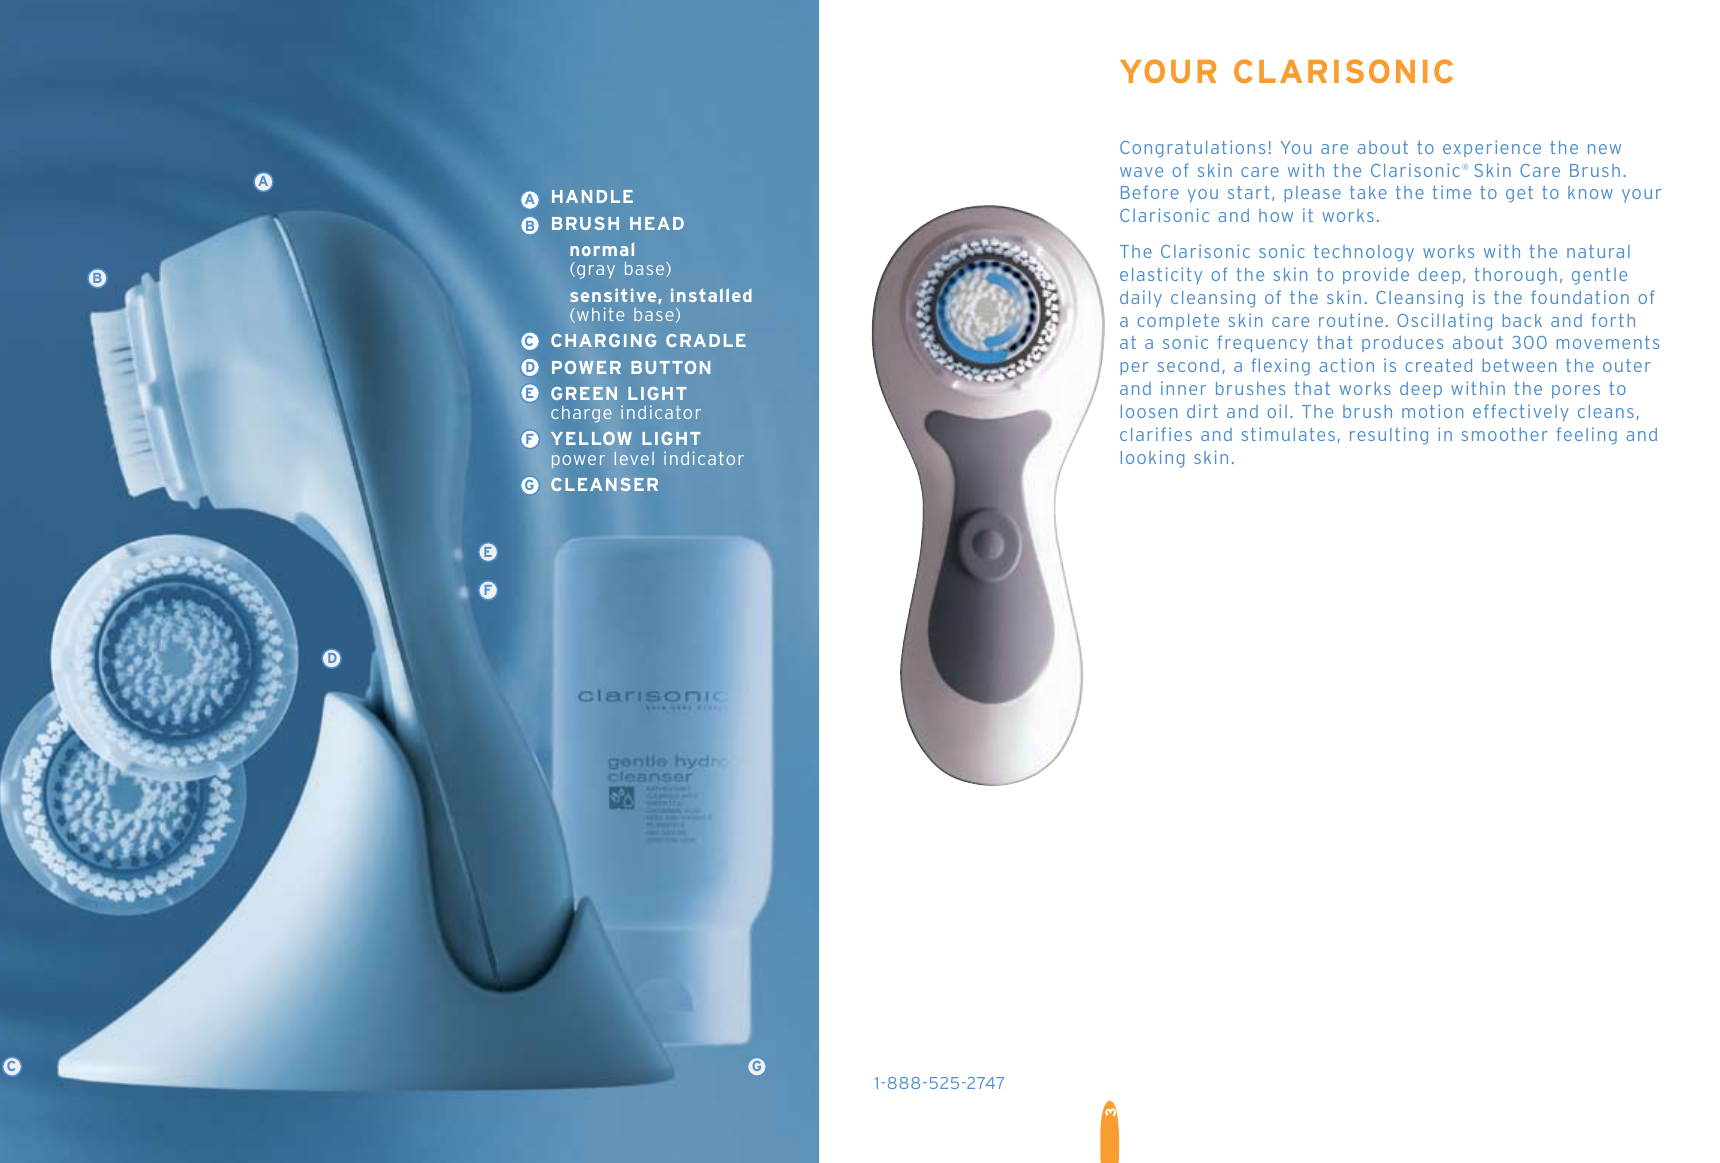 3EFDAGCBABCDEFGYOUR CLARISONICCongratulations! You are about to experience the new  wave of skin care with the Clarisonic® Skin Care Brush. Before you start, please take the time to get to know your Clarisonic and how it works. The Clarisonic sonic technology works with the natural  elasticity of the skin to provide deep, thorough, gentle  daily cleansing of the skin. Cleansing is the foundation of a complete skin care routine. Oscillating back and forth  at a sonic frequency that produces about 300 movements  per second, a ﬂexing action is created between the outer  and inner brushes that works deep within the pores to  loosen dirt and oil. The brush motion effectively cleans, clarifies and stimulates, resulting in smoother feeling and looking skin.1-888-525-2747  HANDLE  BRUSH HEAD    normal      (gray base)    sensitive, installed       (white base)                     CHARGING CRADLE   POWER BUTTON  GREEN LIGHT   charge indicator   YELLOW LIGHT   power level indicator  CLEANSER